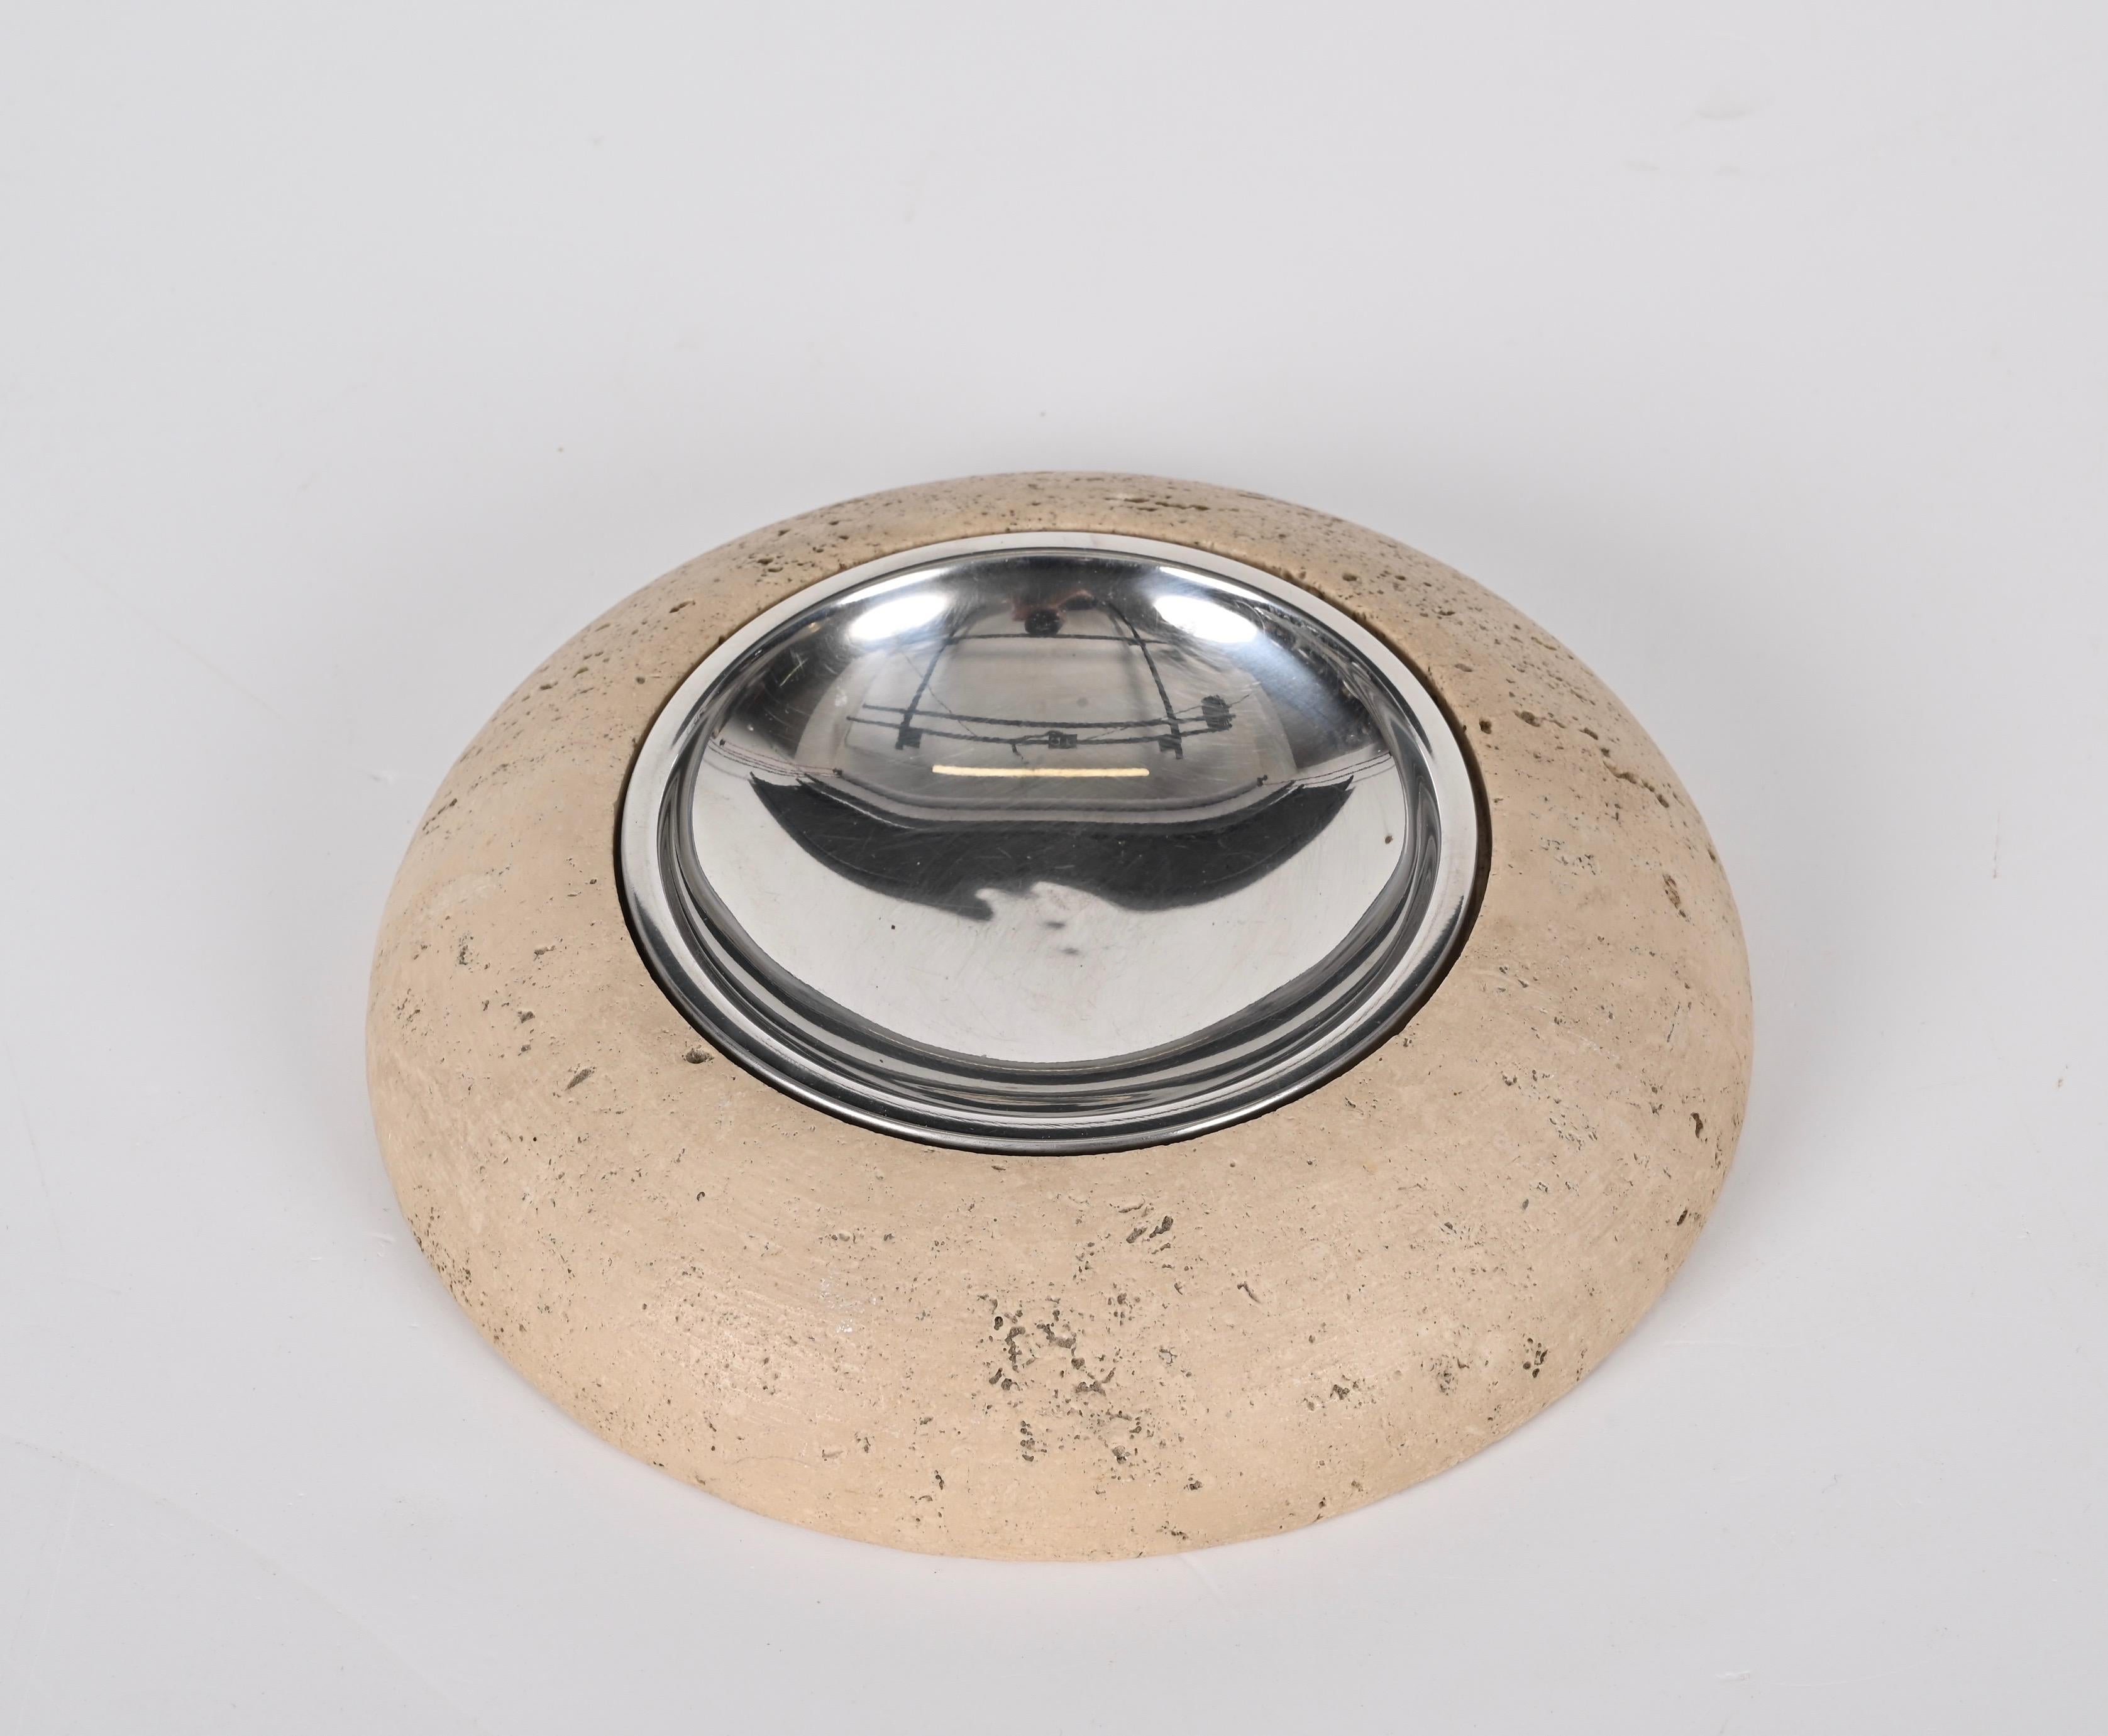 Midcentury Round Ashtray White Travertine Marble and Steel, Mannelli Italy 1970s For Sale 2